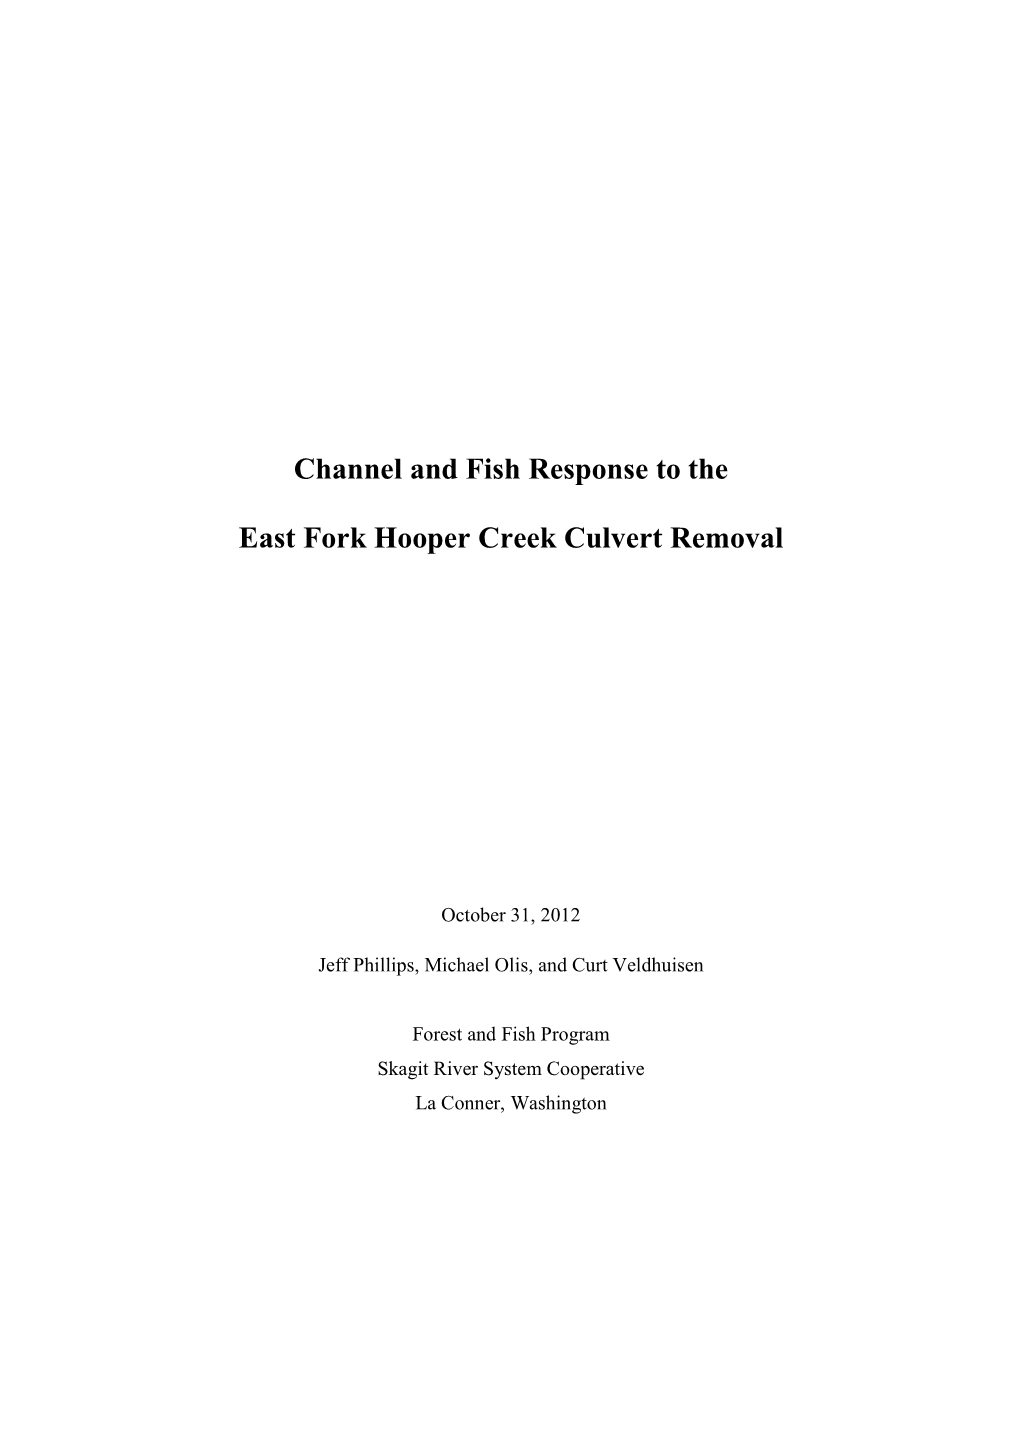 Channel and Fish Response to the East Fork Hooper Creek Culvert Removal